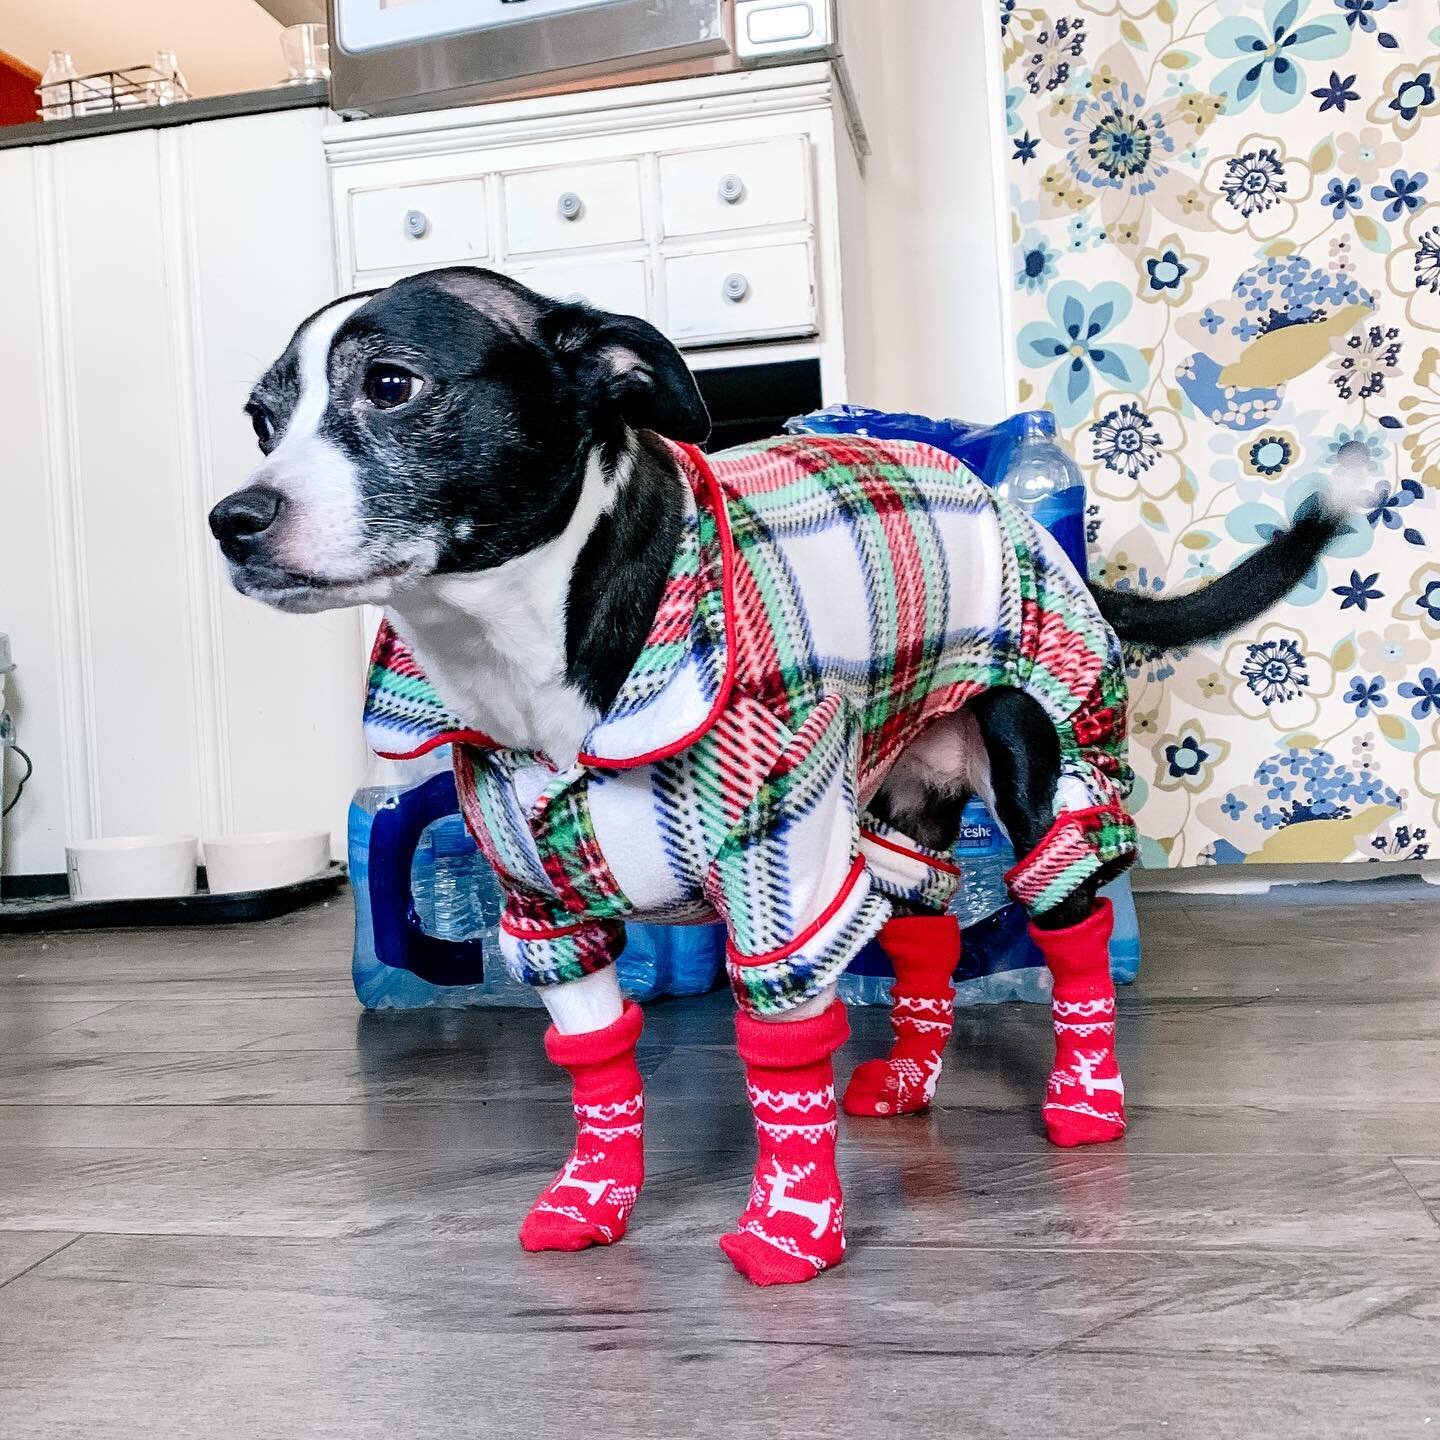 Olive isn&rsquo;t amused with the socks today. Buuuut, when you have to go rescue her in the cold because she just stops, frozen, you&rsquo;ll try anything. 😂😂 
What&rsquo;s the weather like where you are?? 
whispers *if it&rsquo;s warm, I don&rsqu